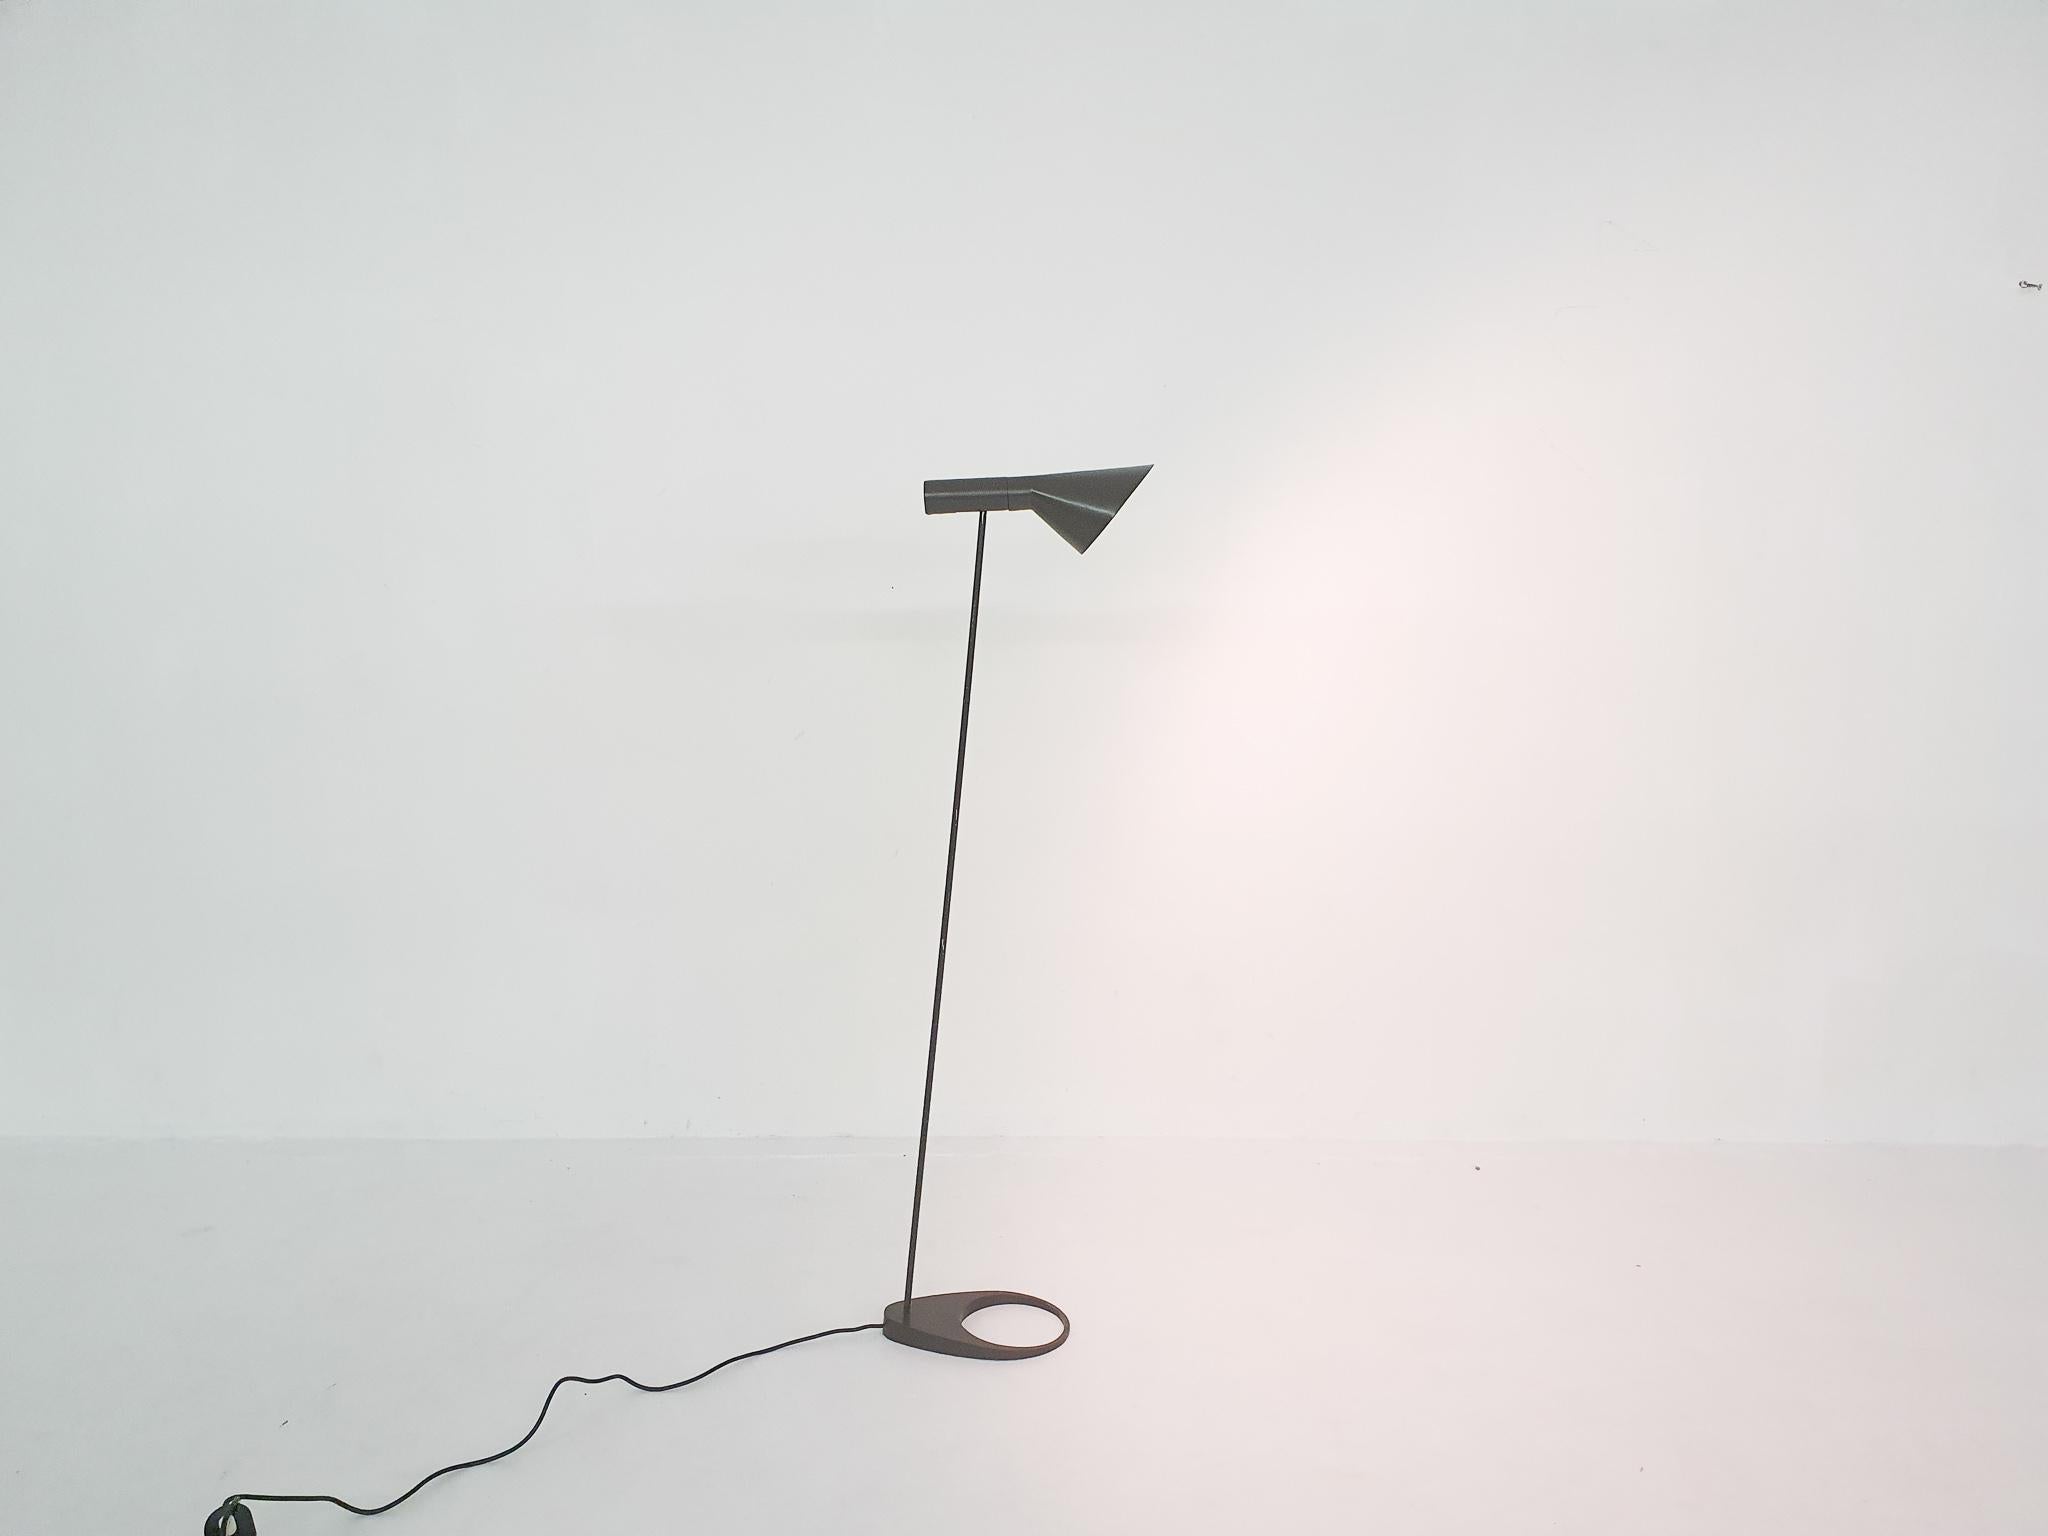 Original floor lamp by Arne Jacobsen for Louis Poulsen. In dark green-grey
The lamp shade has been repainted in the original color.
Marked at the bottom.